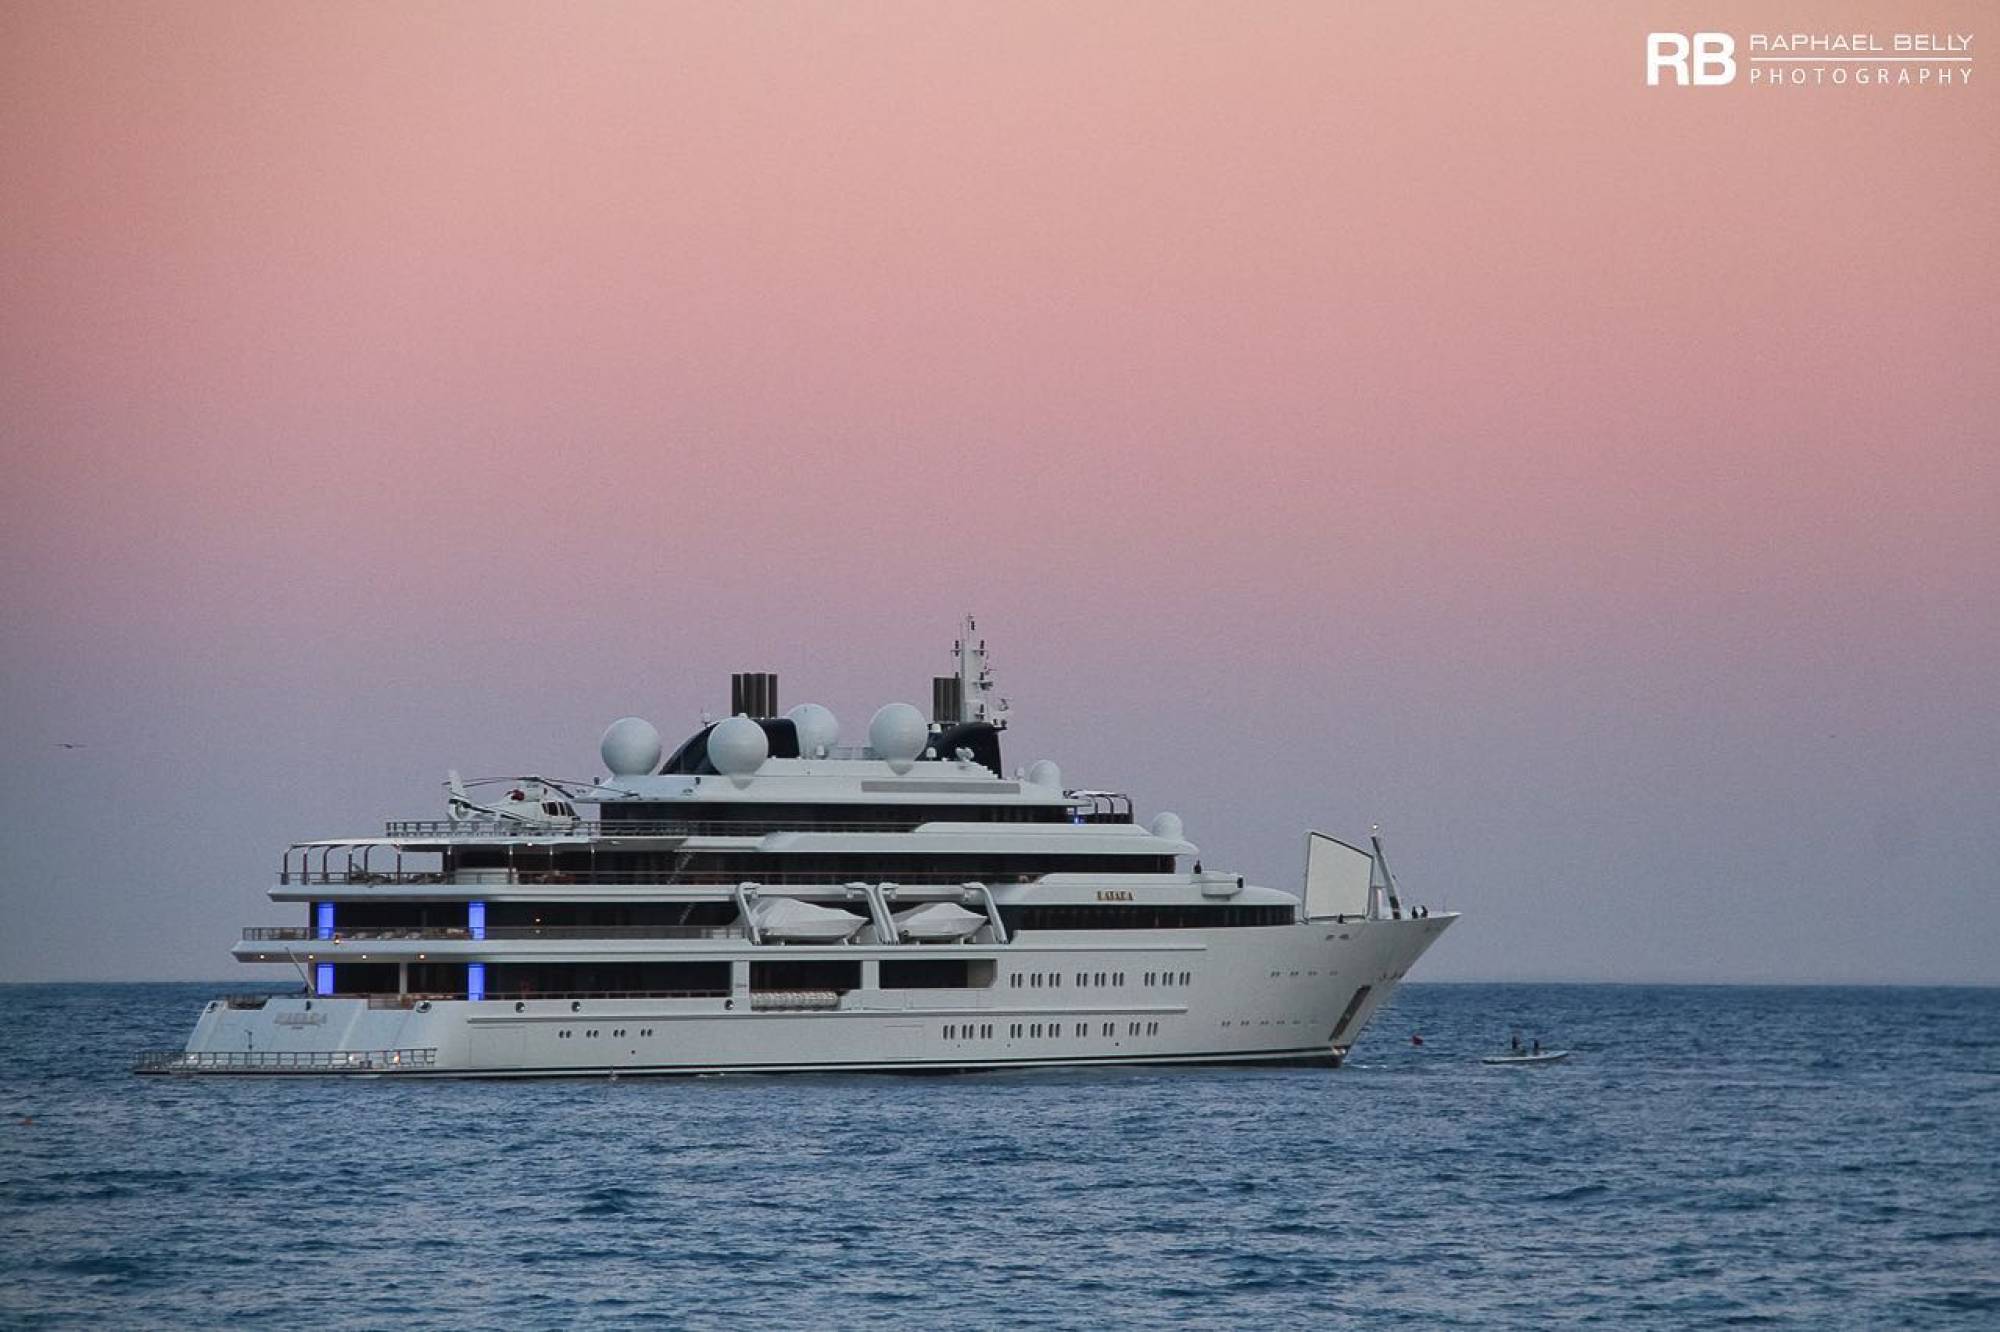 The Katara, one of the world’s most expensive and largest mega-yachts. Photo: @Superyachtfan/Facebook